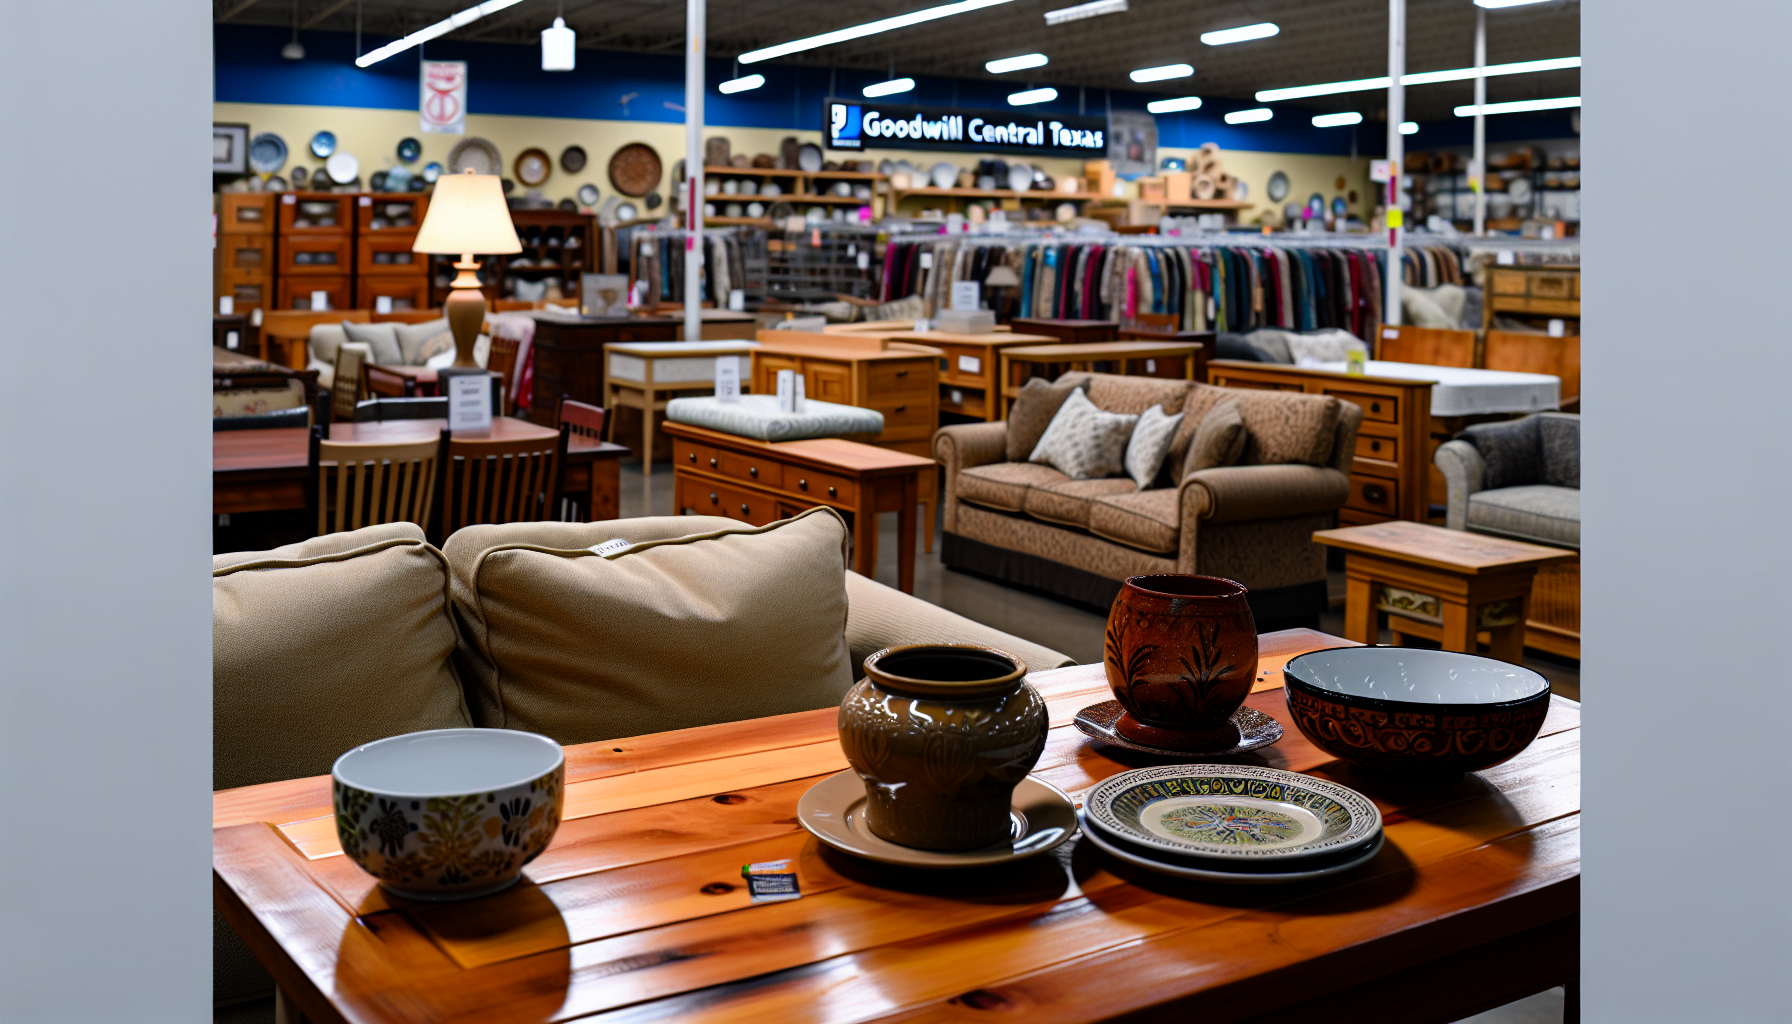 Goodwill Central Texas store interior with a variety of donated furniture and household items